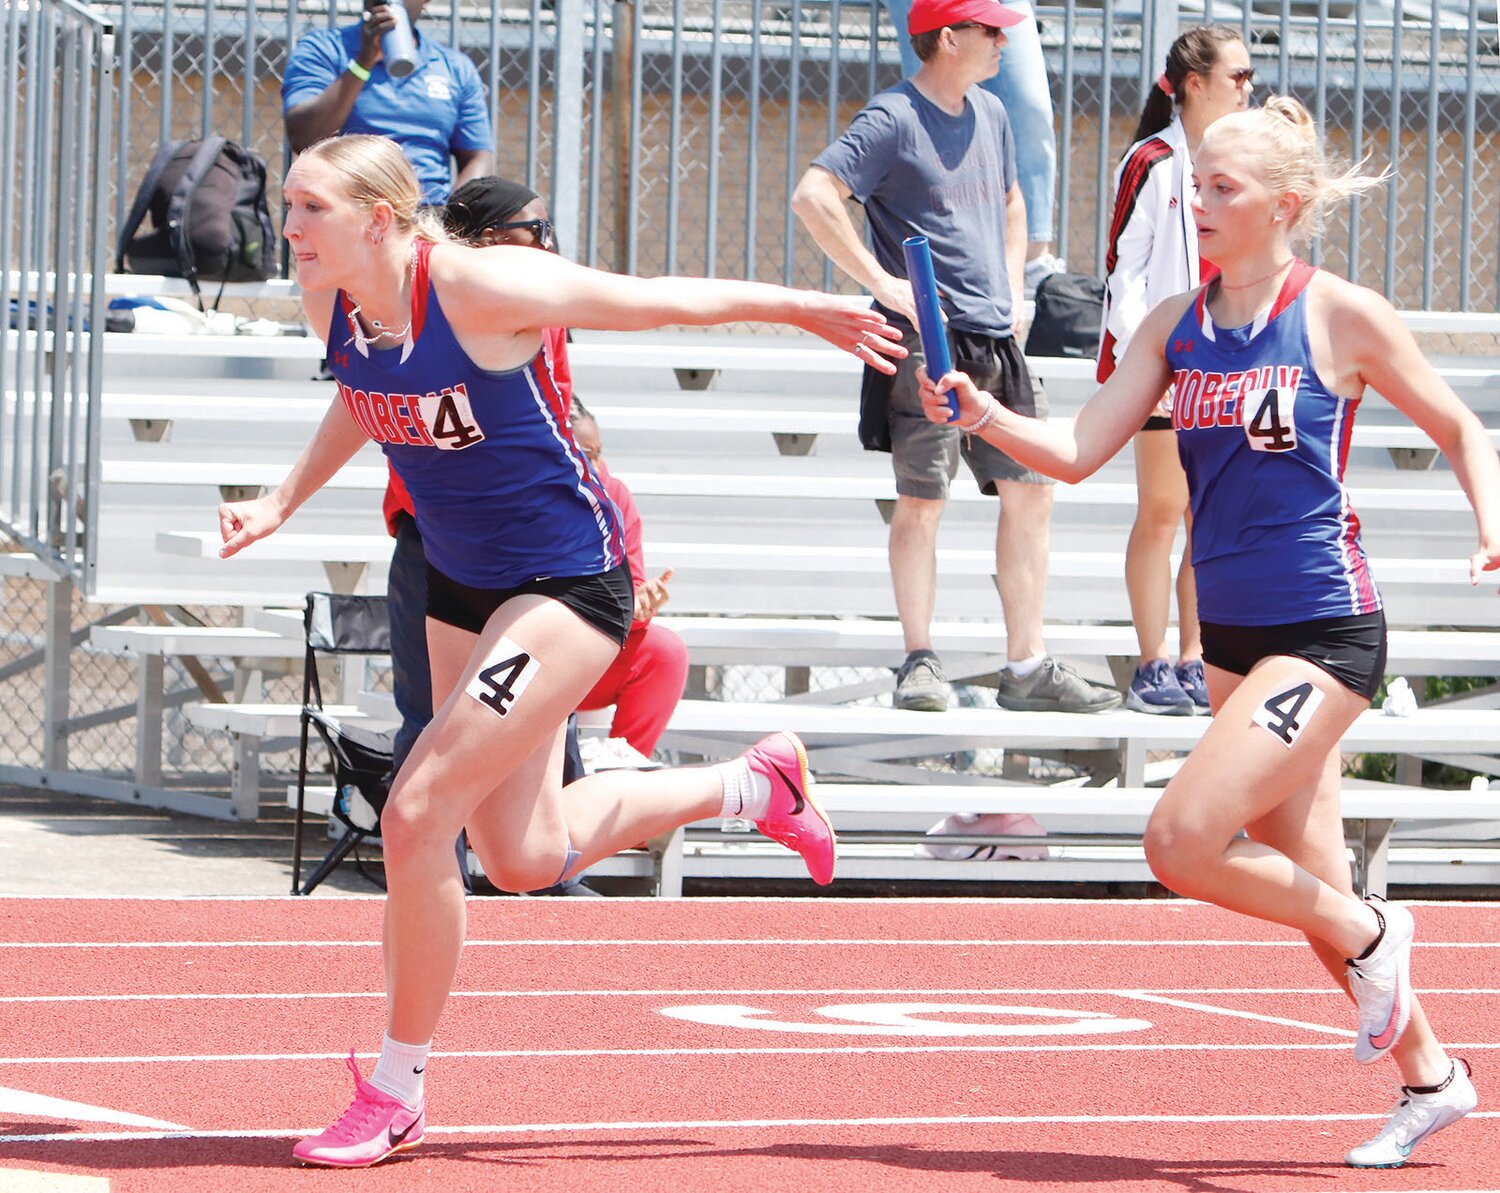 Moberly's Asa Fanning (left) accepts the baton from teammate Bryleigh Knox during the 4x200-meter relay at the Class 4 Section 2 meet on Saturday, May 20, at Ron Whittaker Track in Mexico.